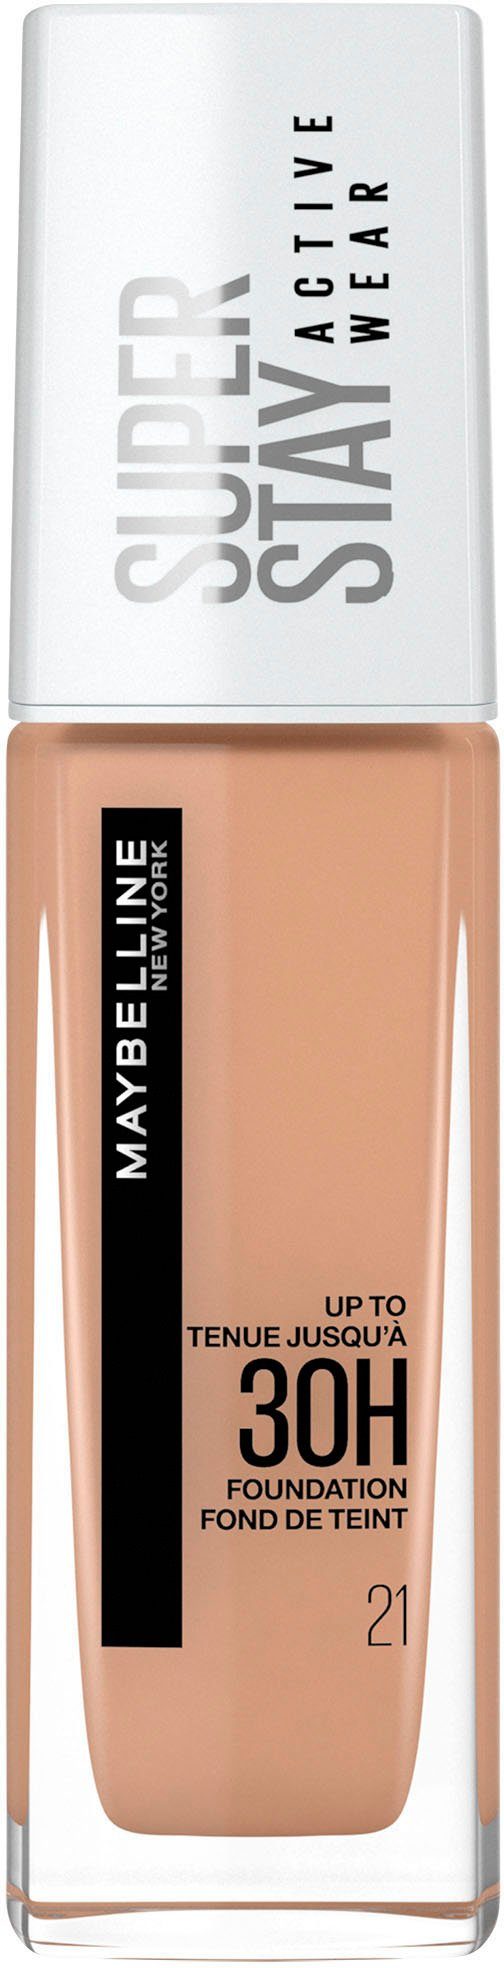 Beige Wear Foundation YORK Stay MAYBELLINE 21 Active Super NEW Nude